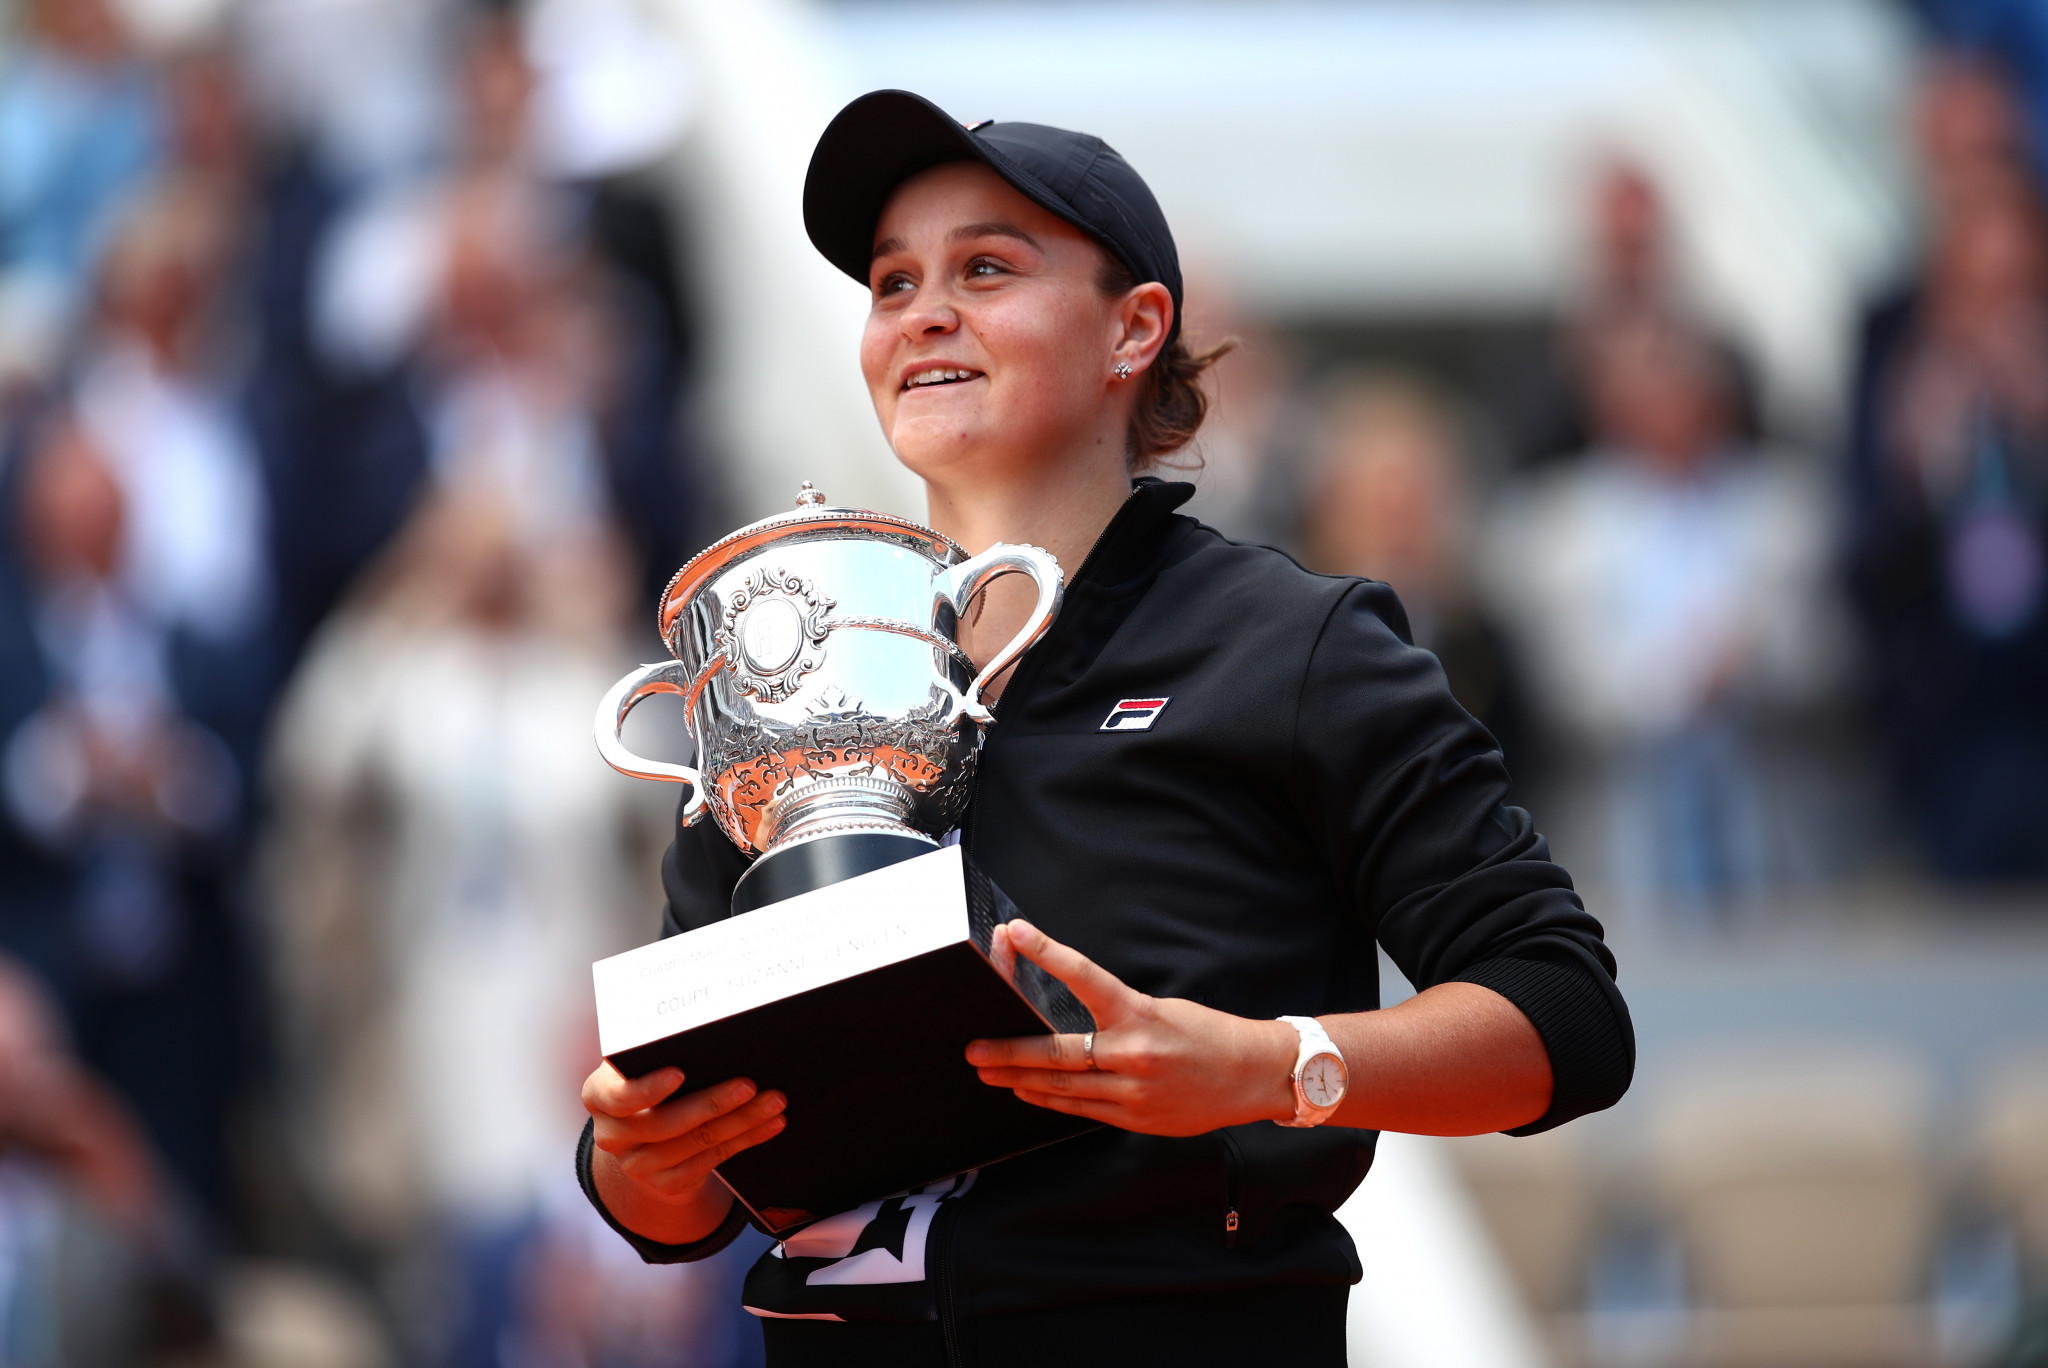 Eighth seed Barty cruises to French Open crown as Thiem sets up Nadal rematch